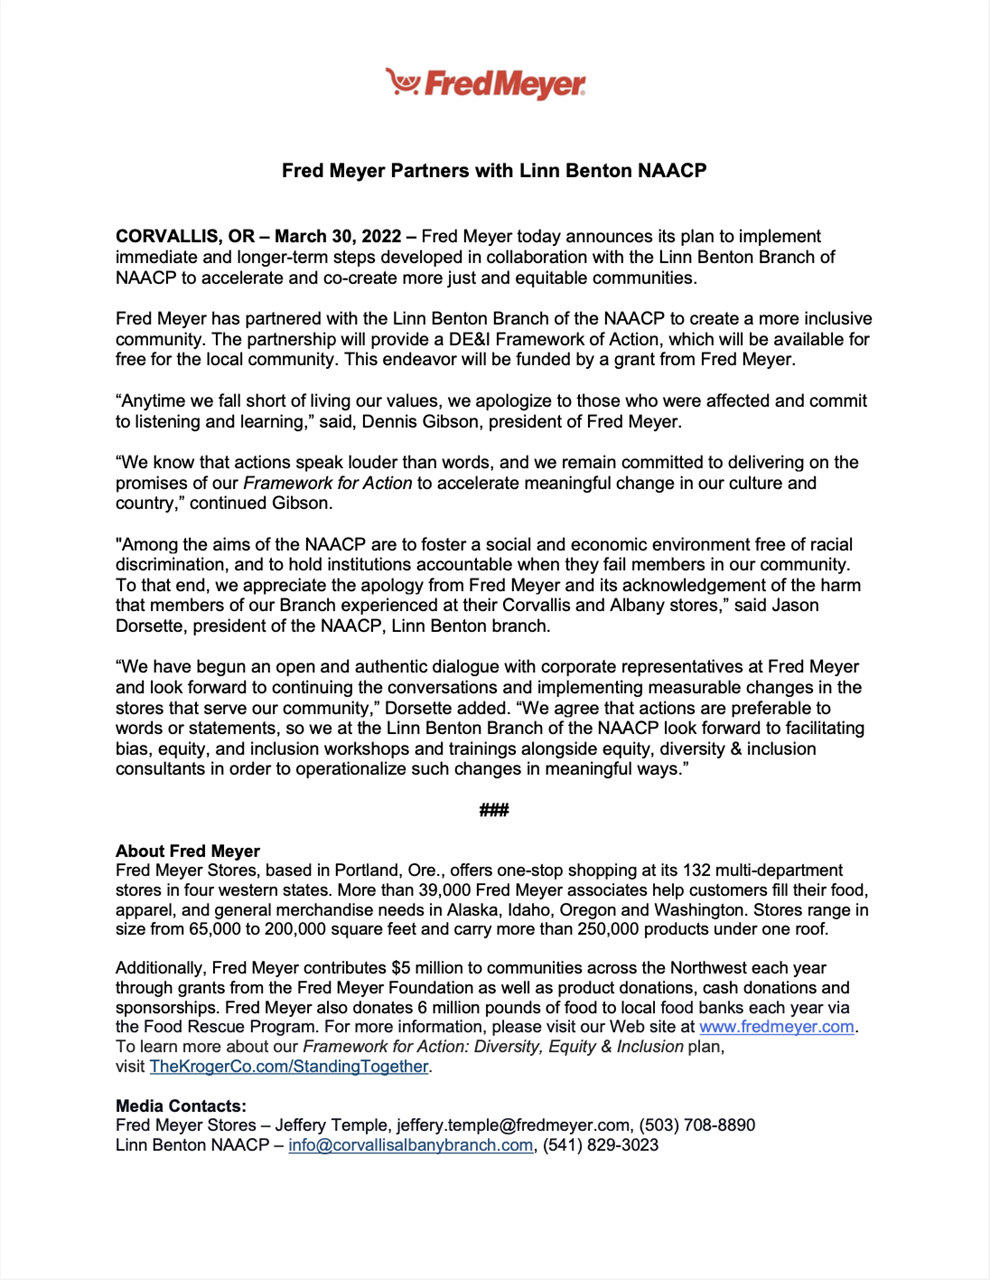 Press Release text from Fred Meyer RE: Partnership with NAACP